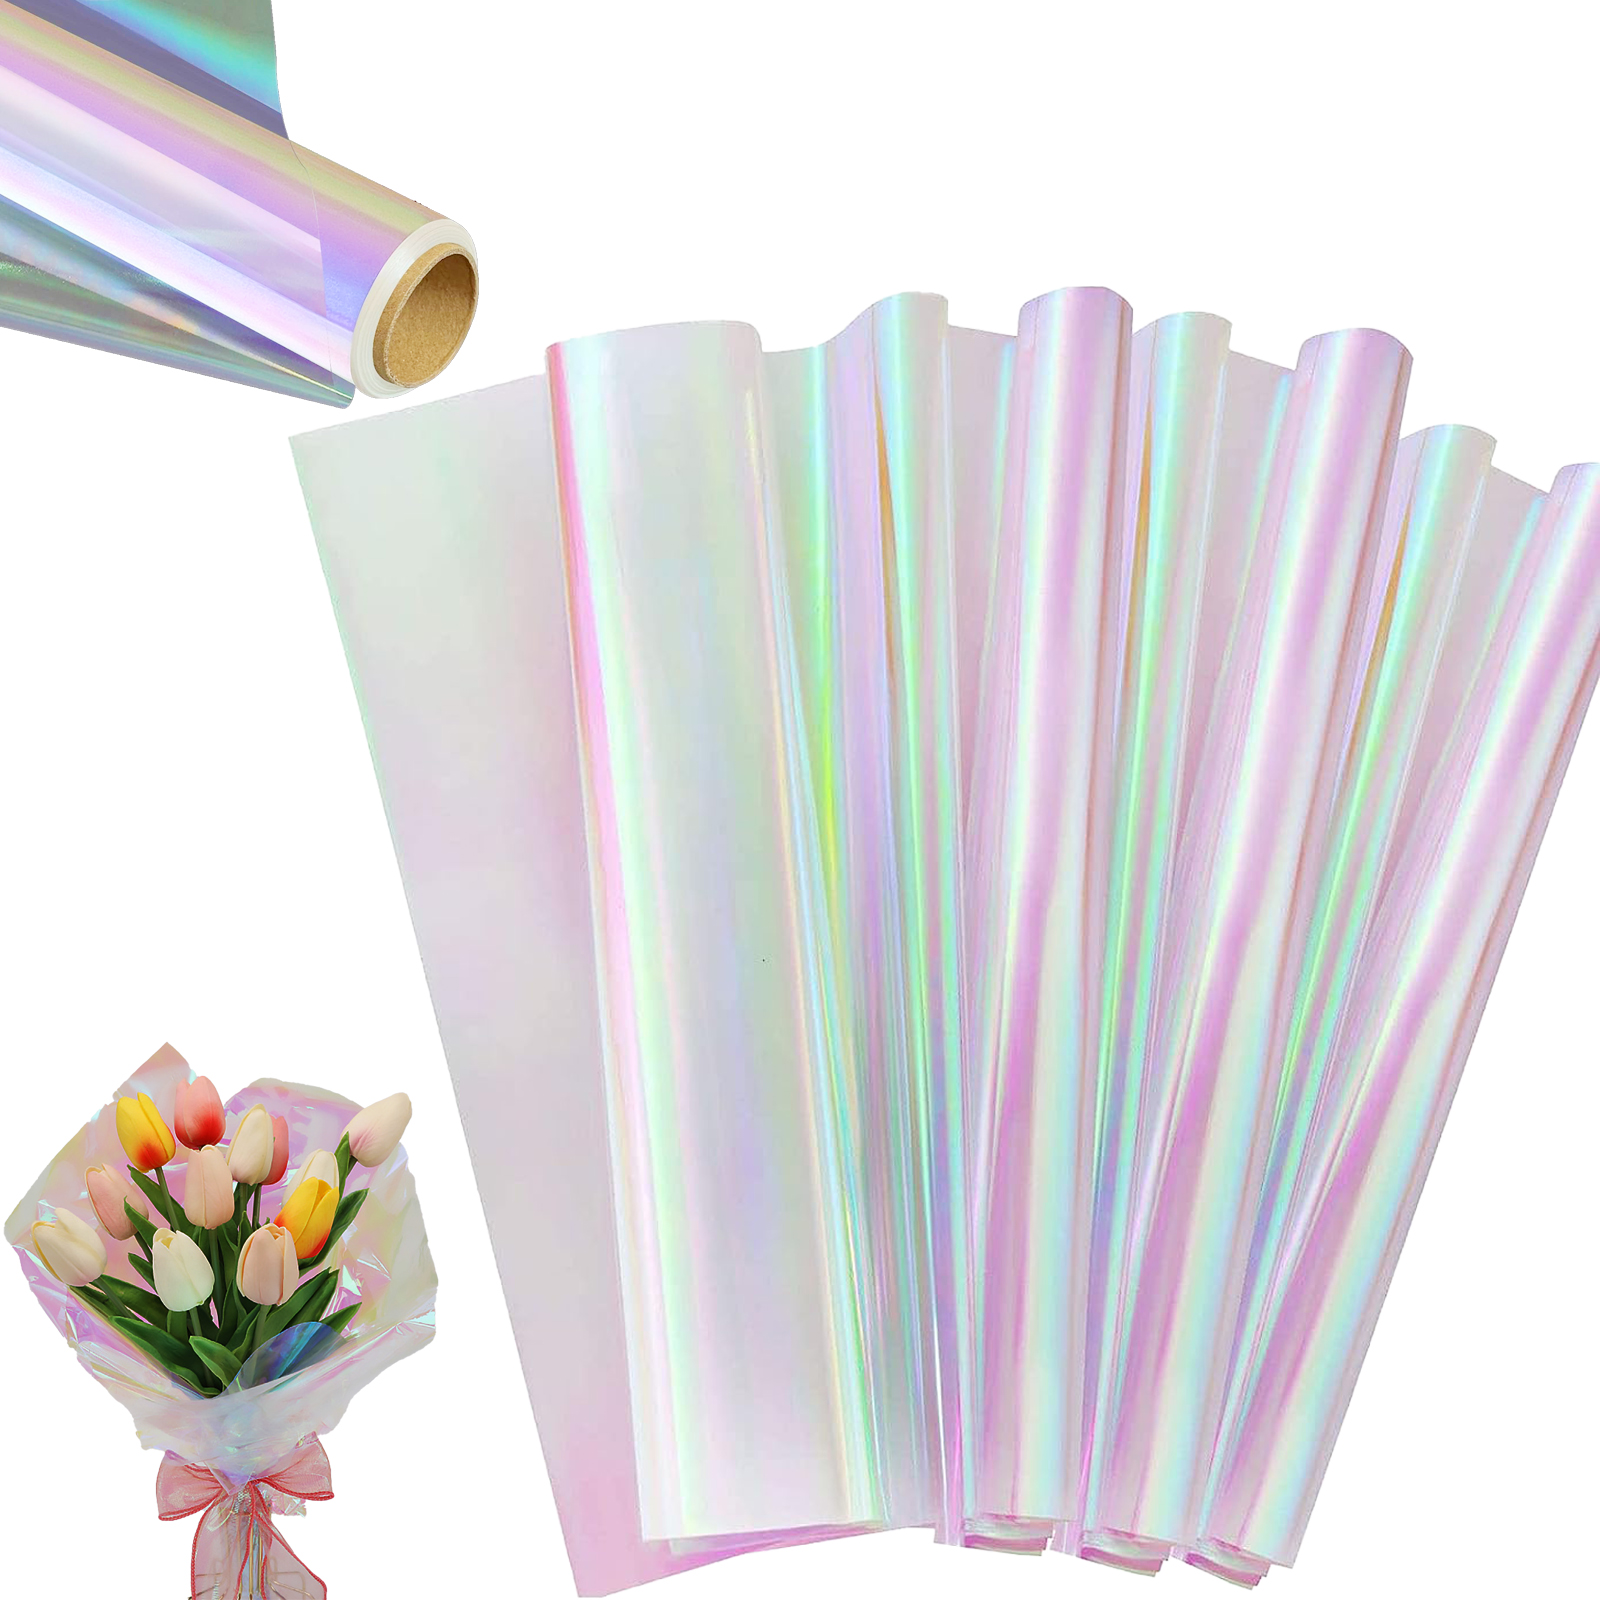 Cellophane Waterproof Colorful Border Transparent Flower Wrapping Paper